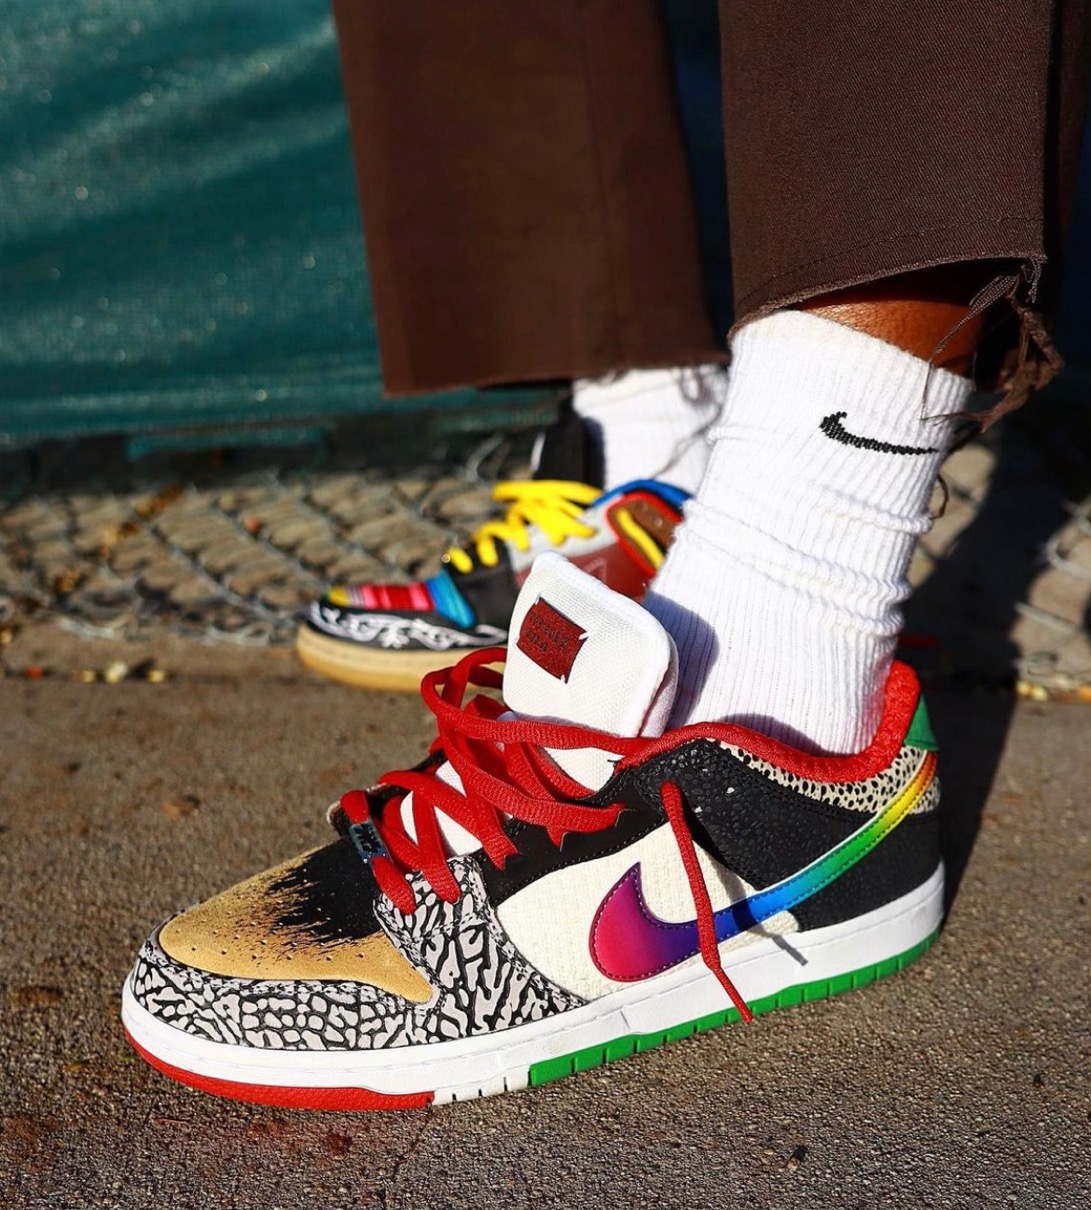 NIKE SB DUNK LOW "WHAT THE P-ROD 25cm